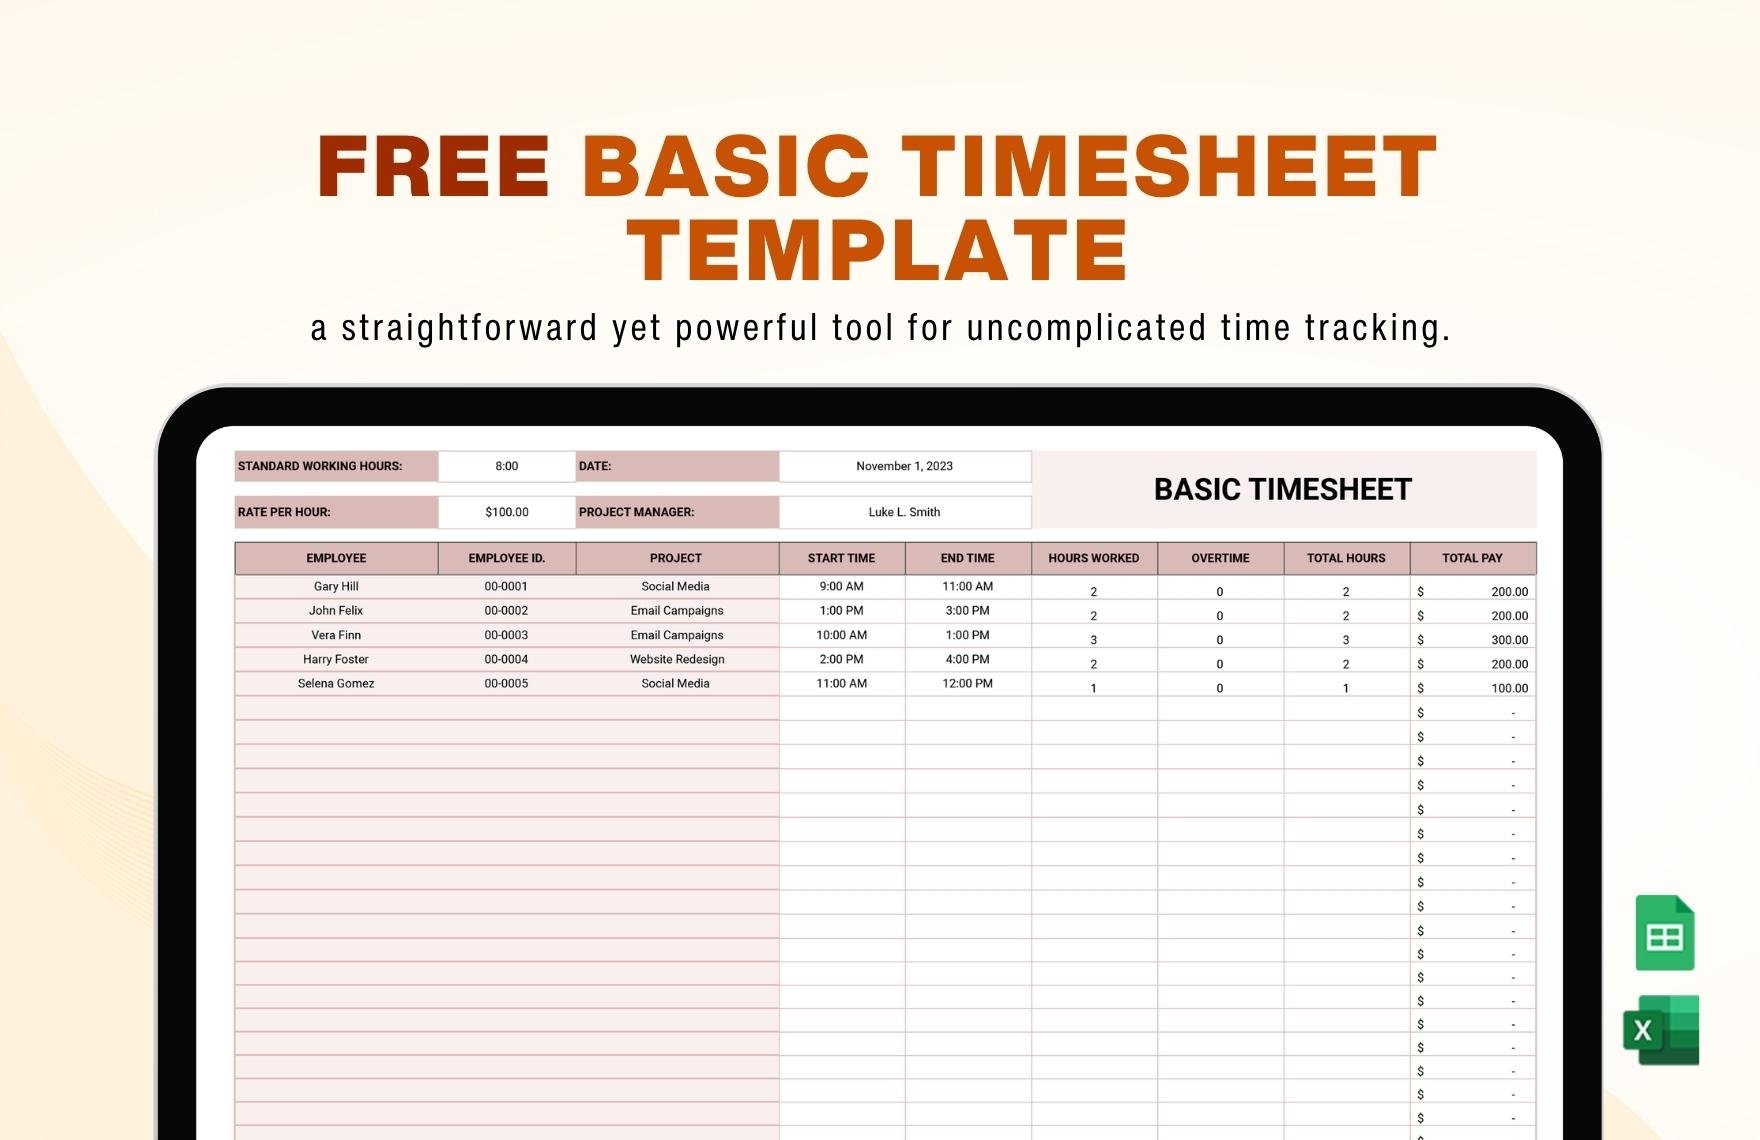 Free Basic Timesheet Template in Excel, Google Sheets